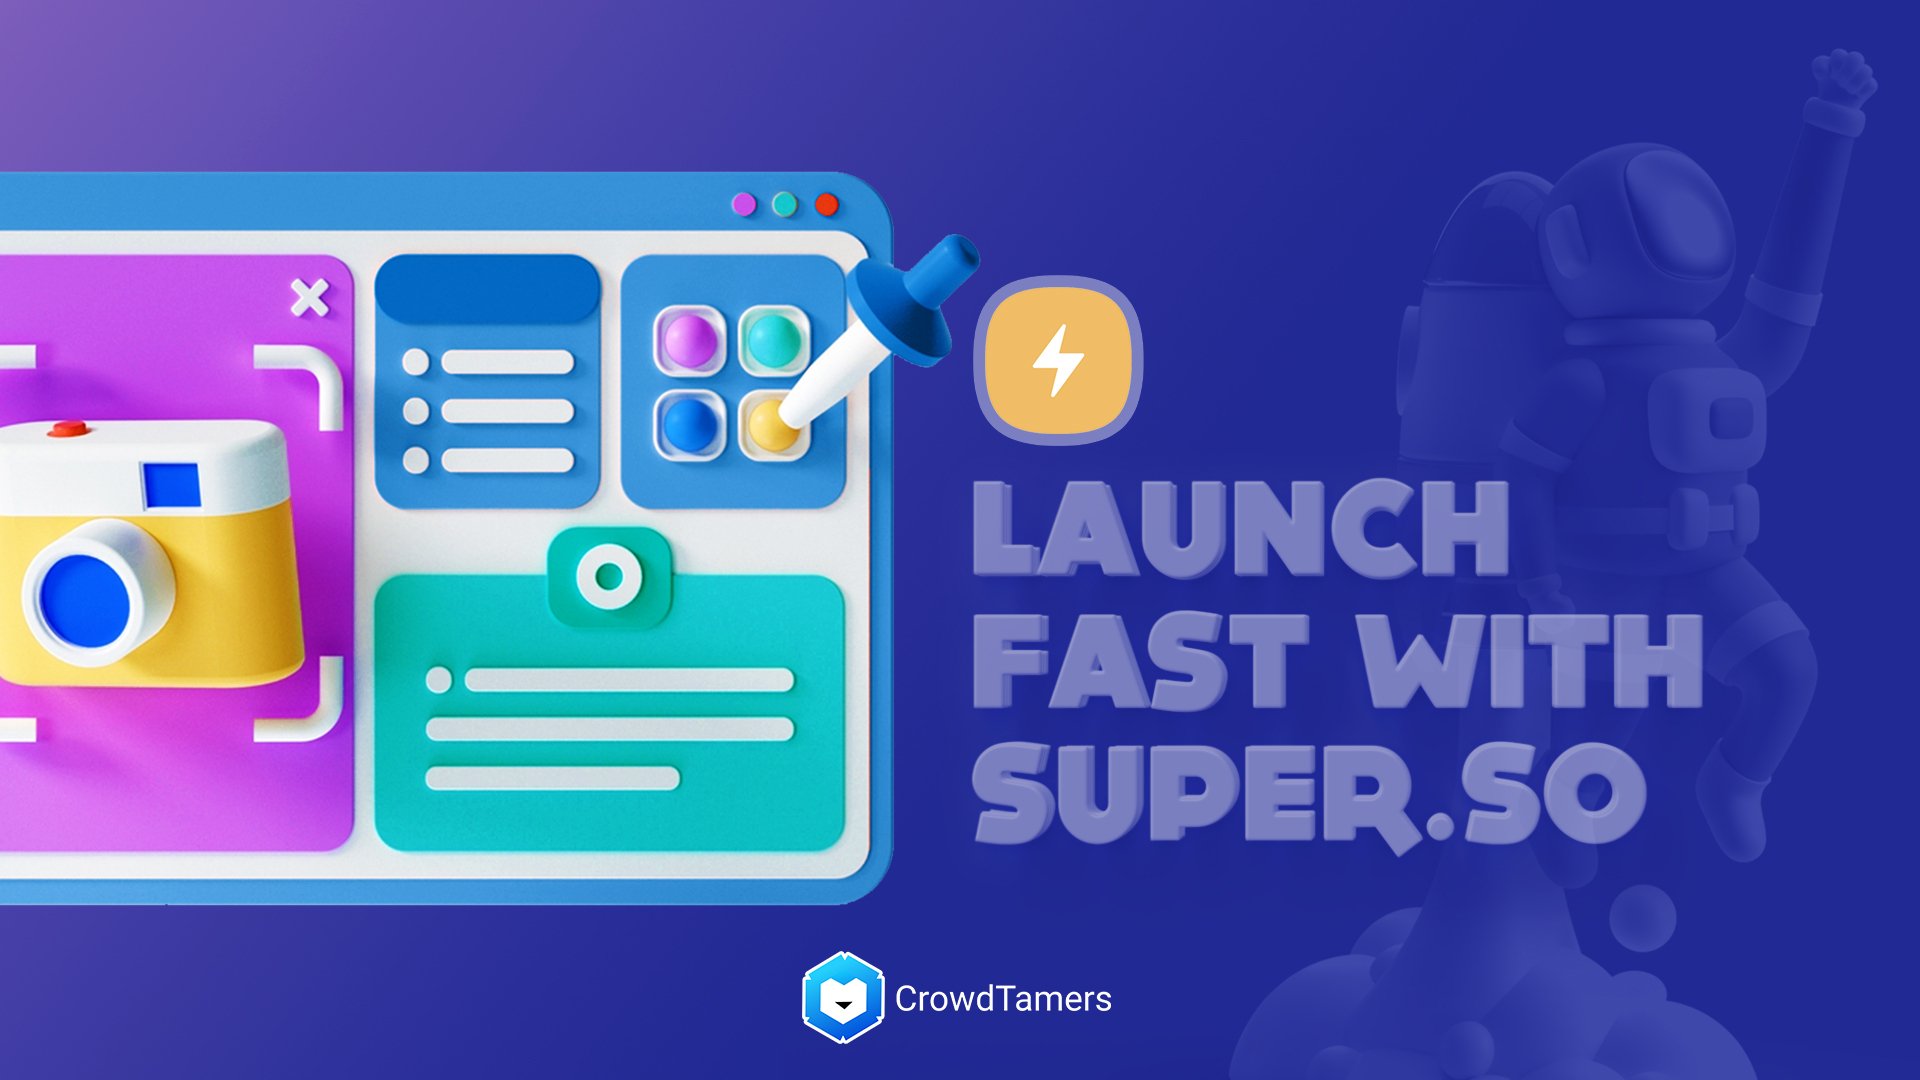 Build your site with Super.so